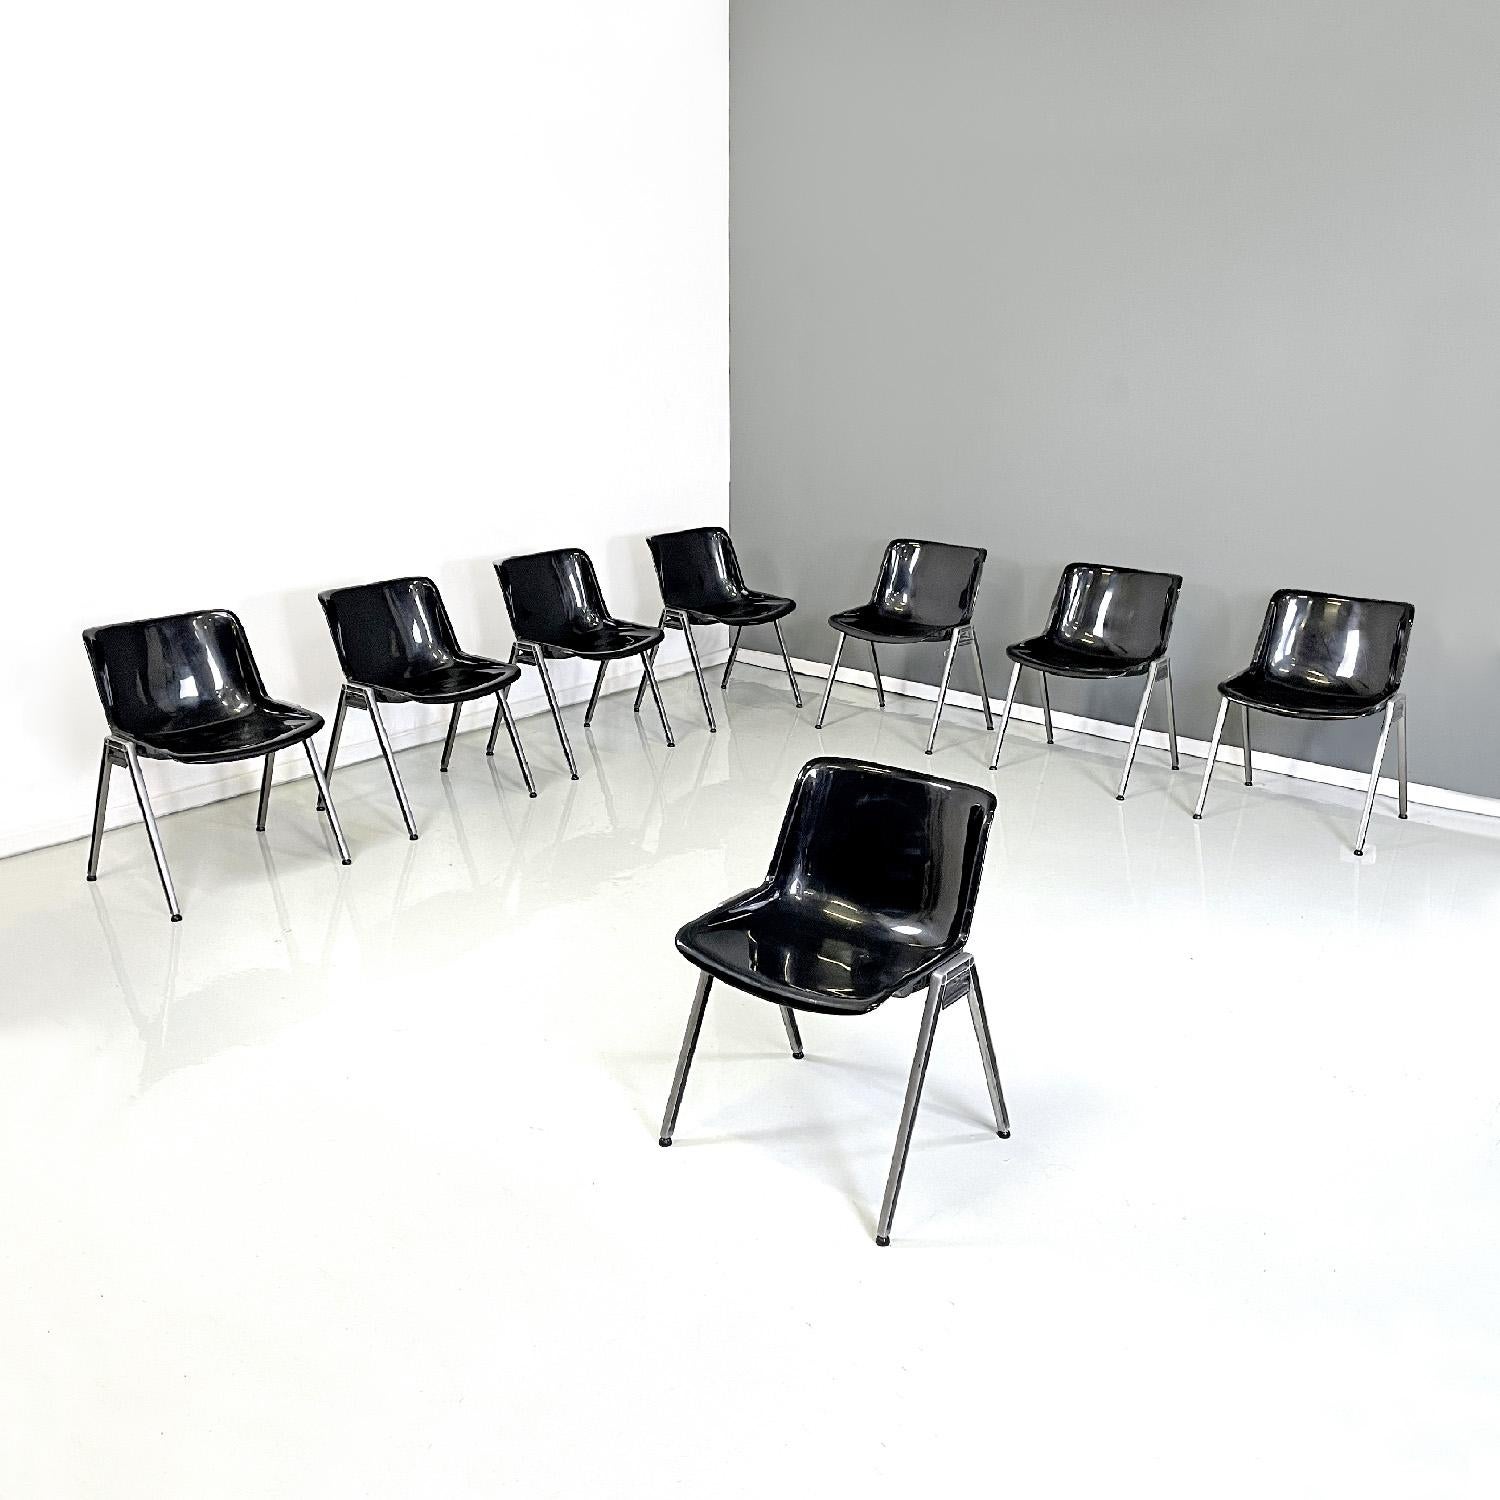 Italian modern black plastic chairs Modus SM 203 by Borsani for Tecno, 1980s
Chairs mod. Modus SM 203 with seat and backrest composed of a curved black plastic monocoque. The aluminum legs are squared. Round black rubber feet. The chairs are